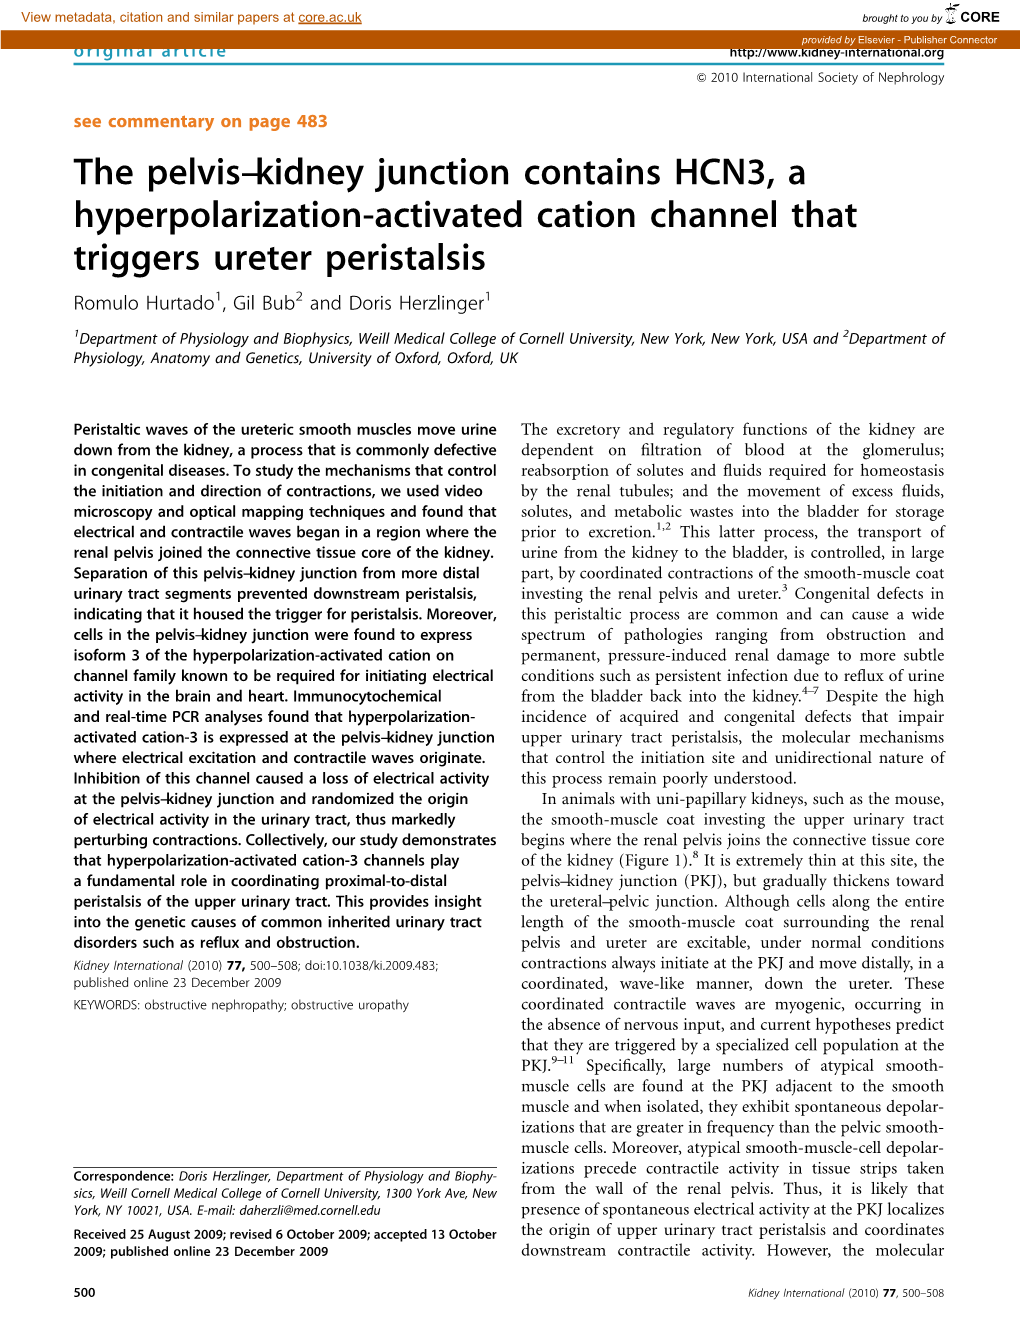 The Pelvis–Kidney Junction Contains HCN3, a Hyperpolarization-Activated Cation Channel That Triggers Ureter Peristalsis